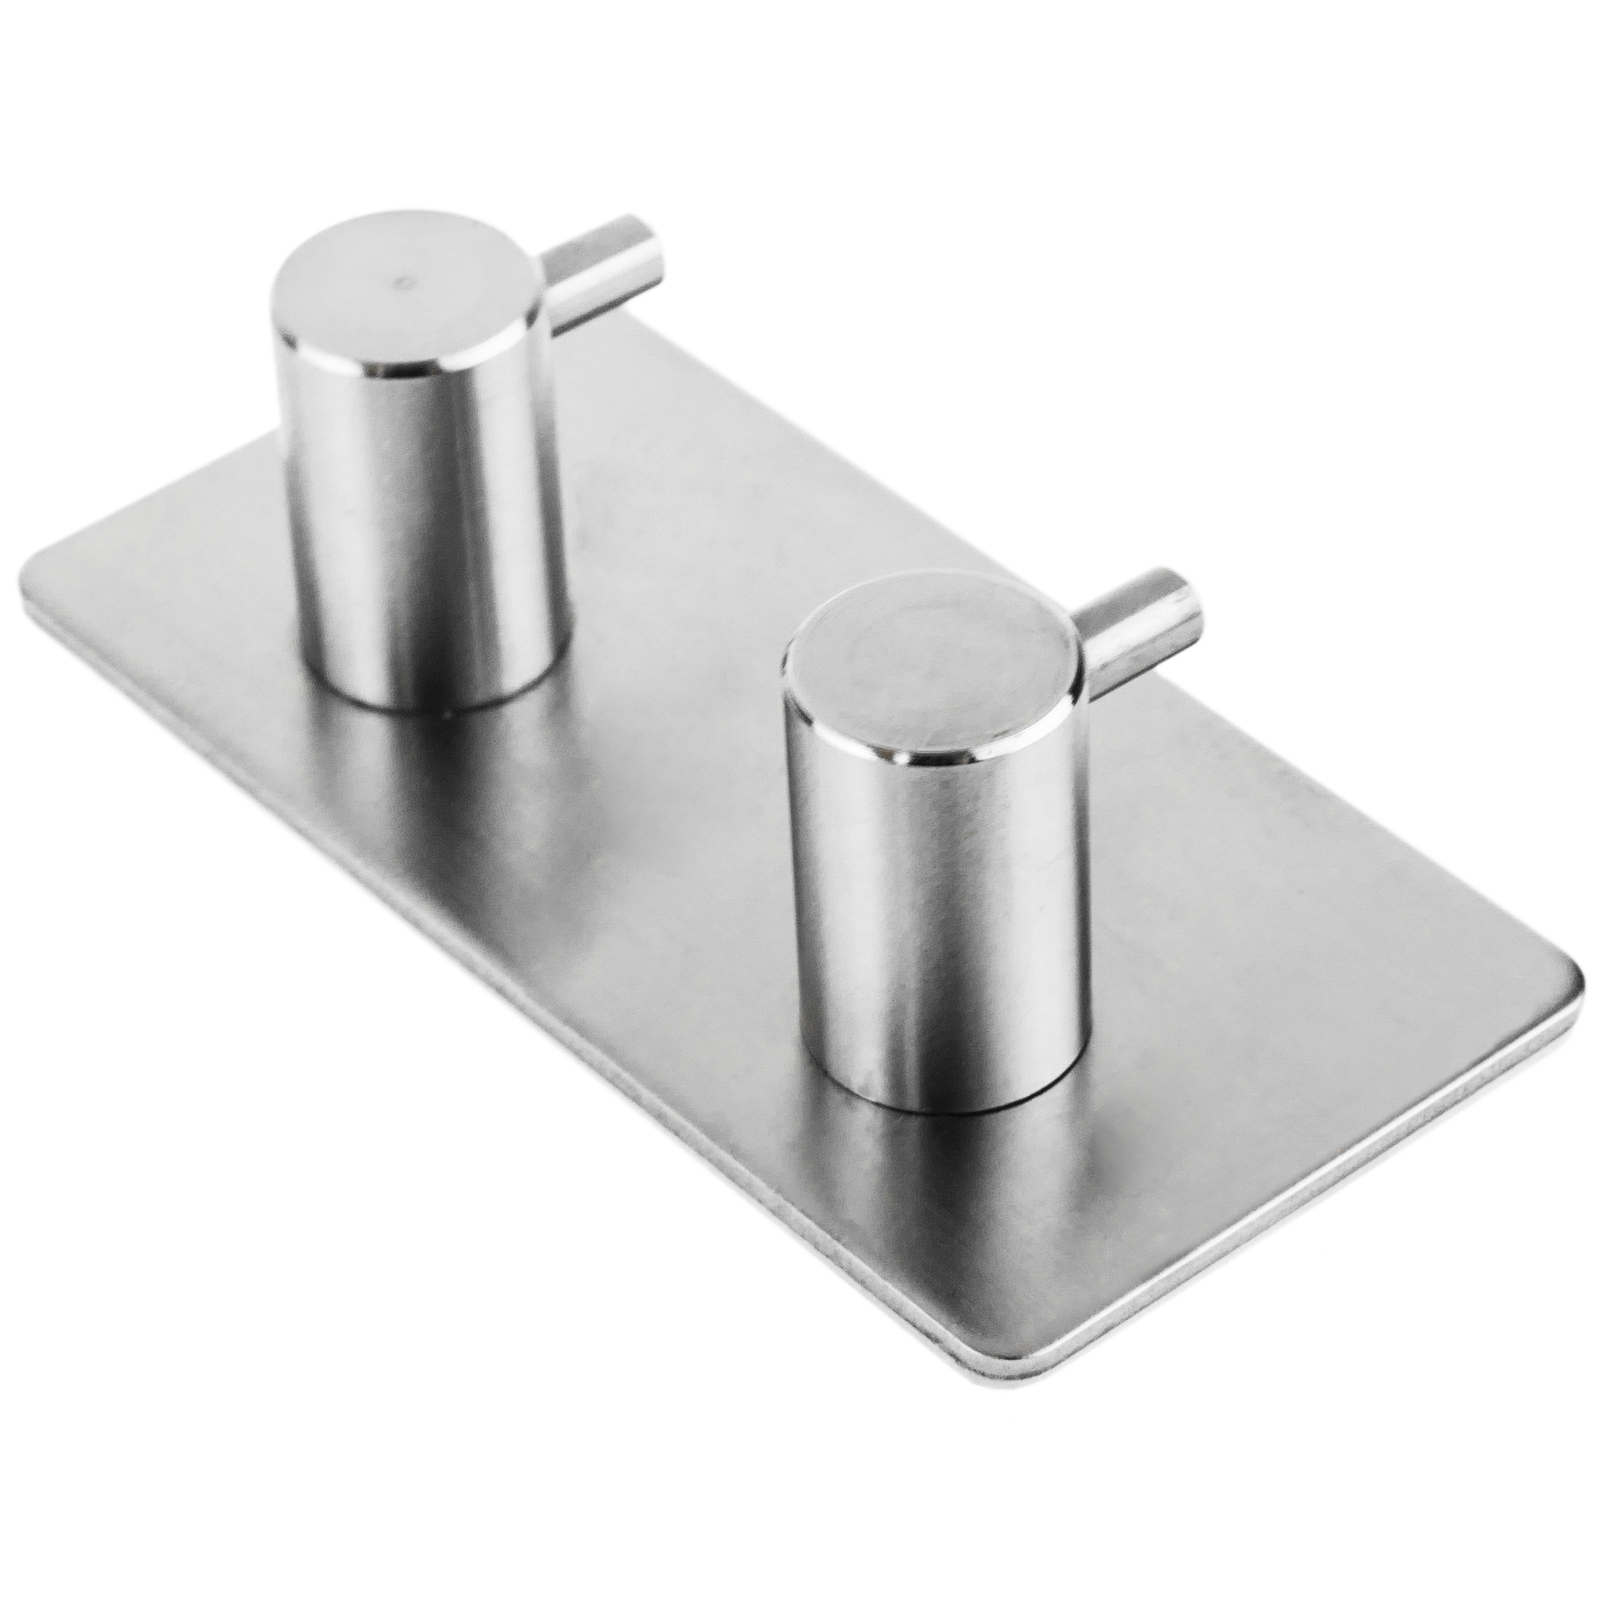 Popuppe Stainless Steel Coat Hooks Coat Hook Wall Mount Coat Hook Stainless Steel Wall Coat Hangers Stainless Steel Wall Coat Hangers Heavy Duty Clothes Hat Holder 